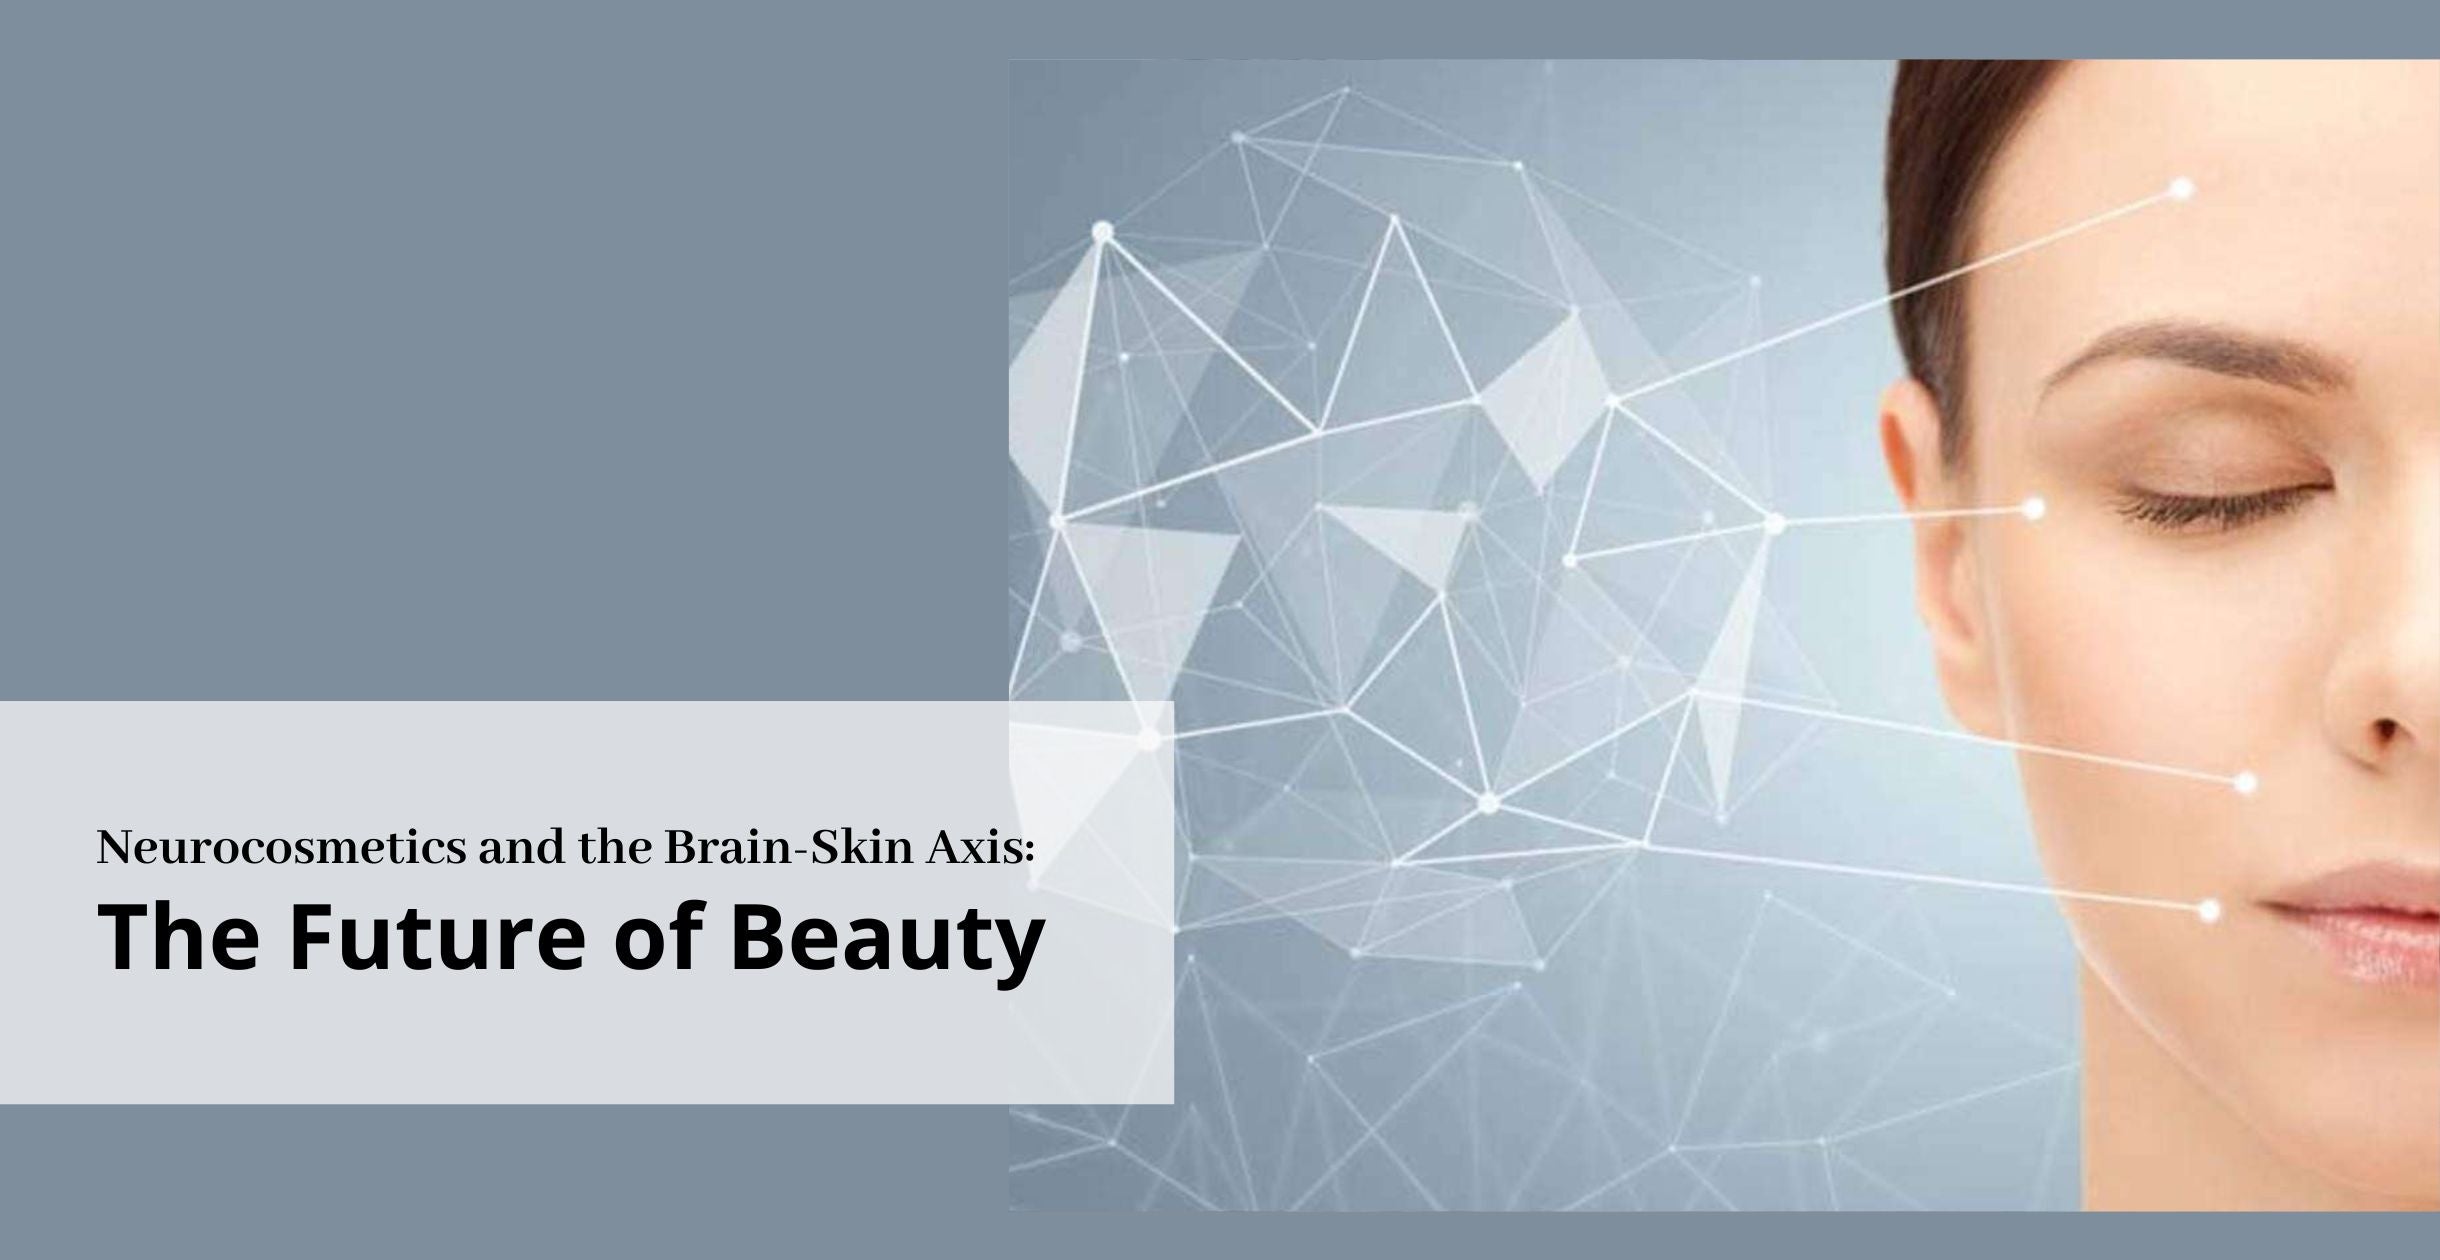 Neurocosmetics and the Brain-Skin Axis: The Future of Beauty